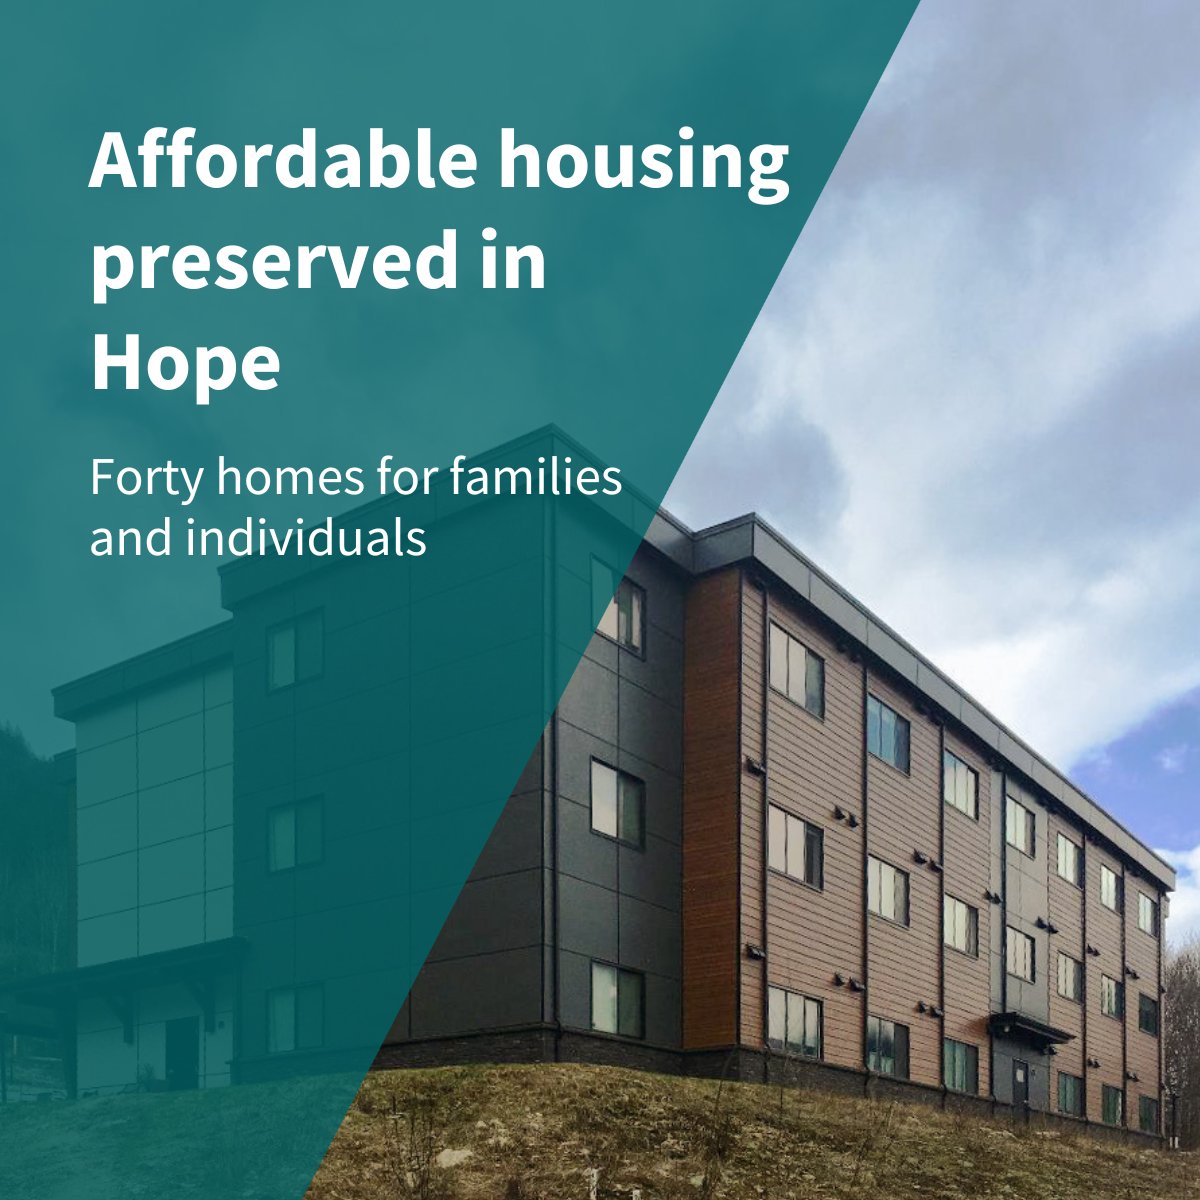 We’re thrilled to announce that families and individuals living in The Ryder apartment building in the District of Hope can now remain in their rental homes.

For more information: 

#DistrictofHope #AffordableHomes